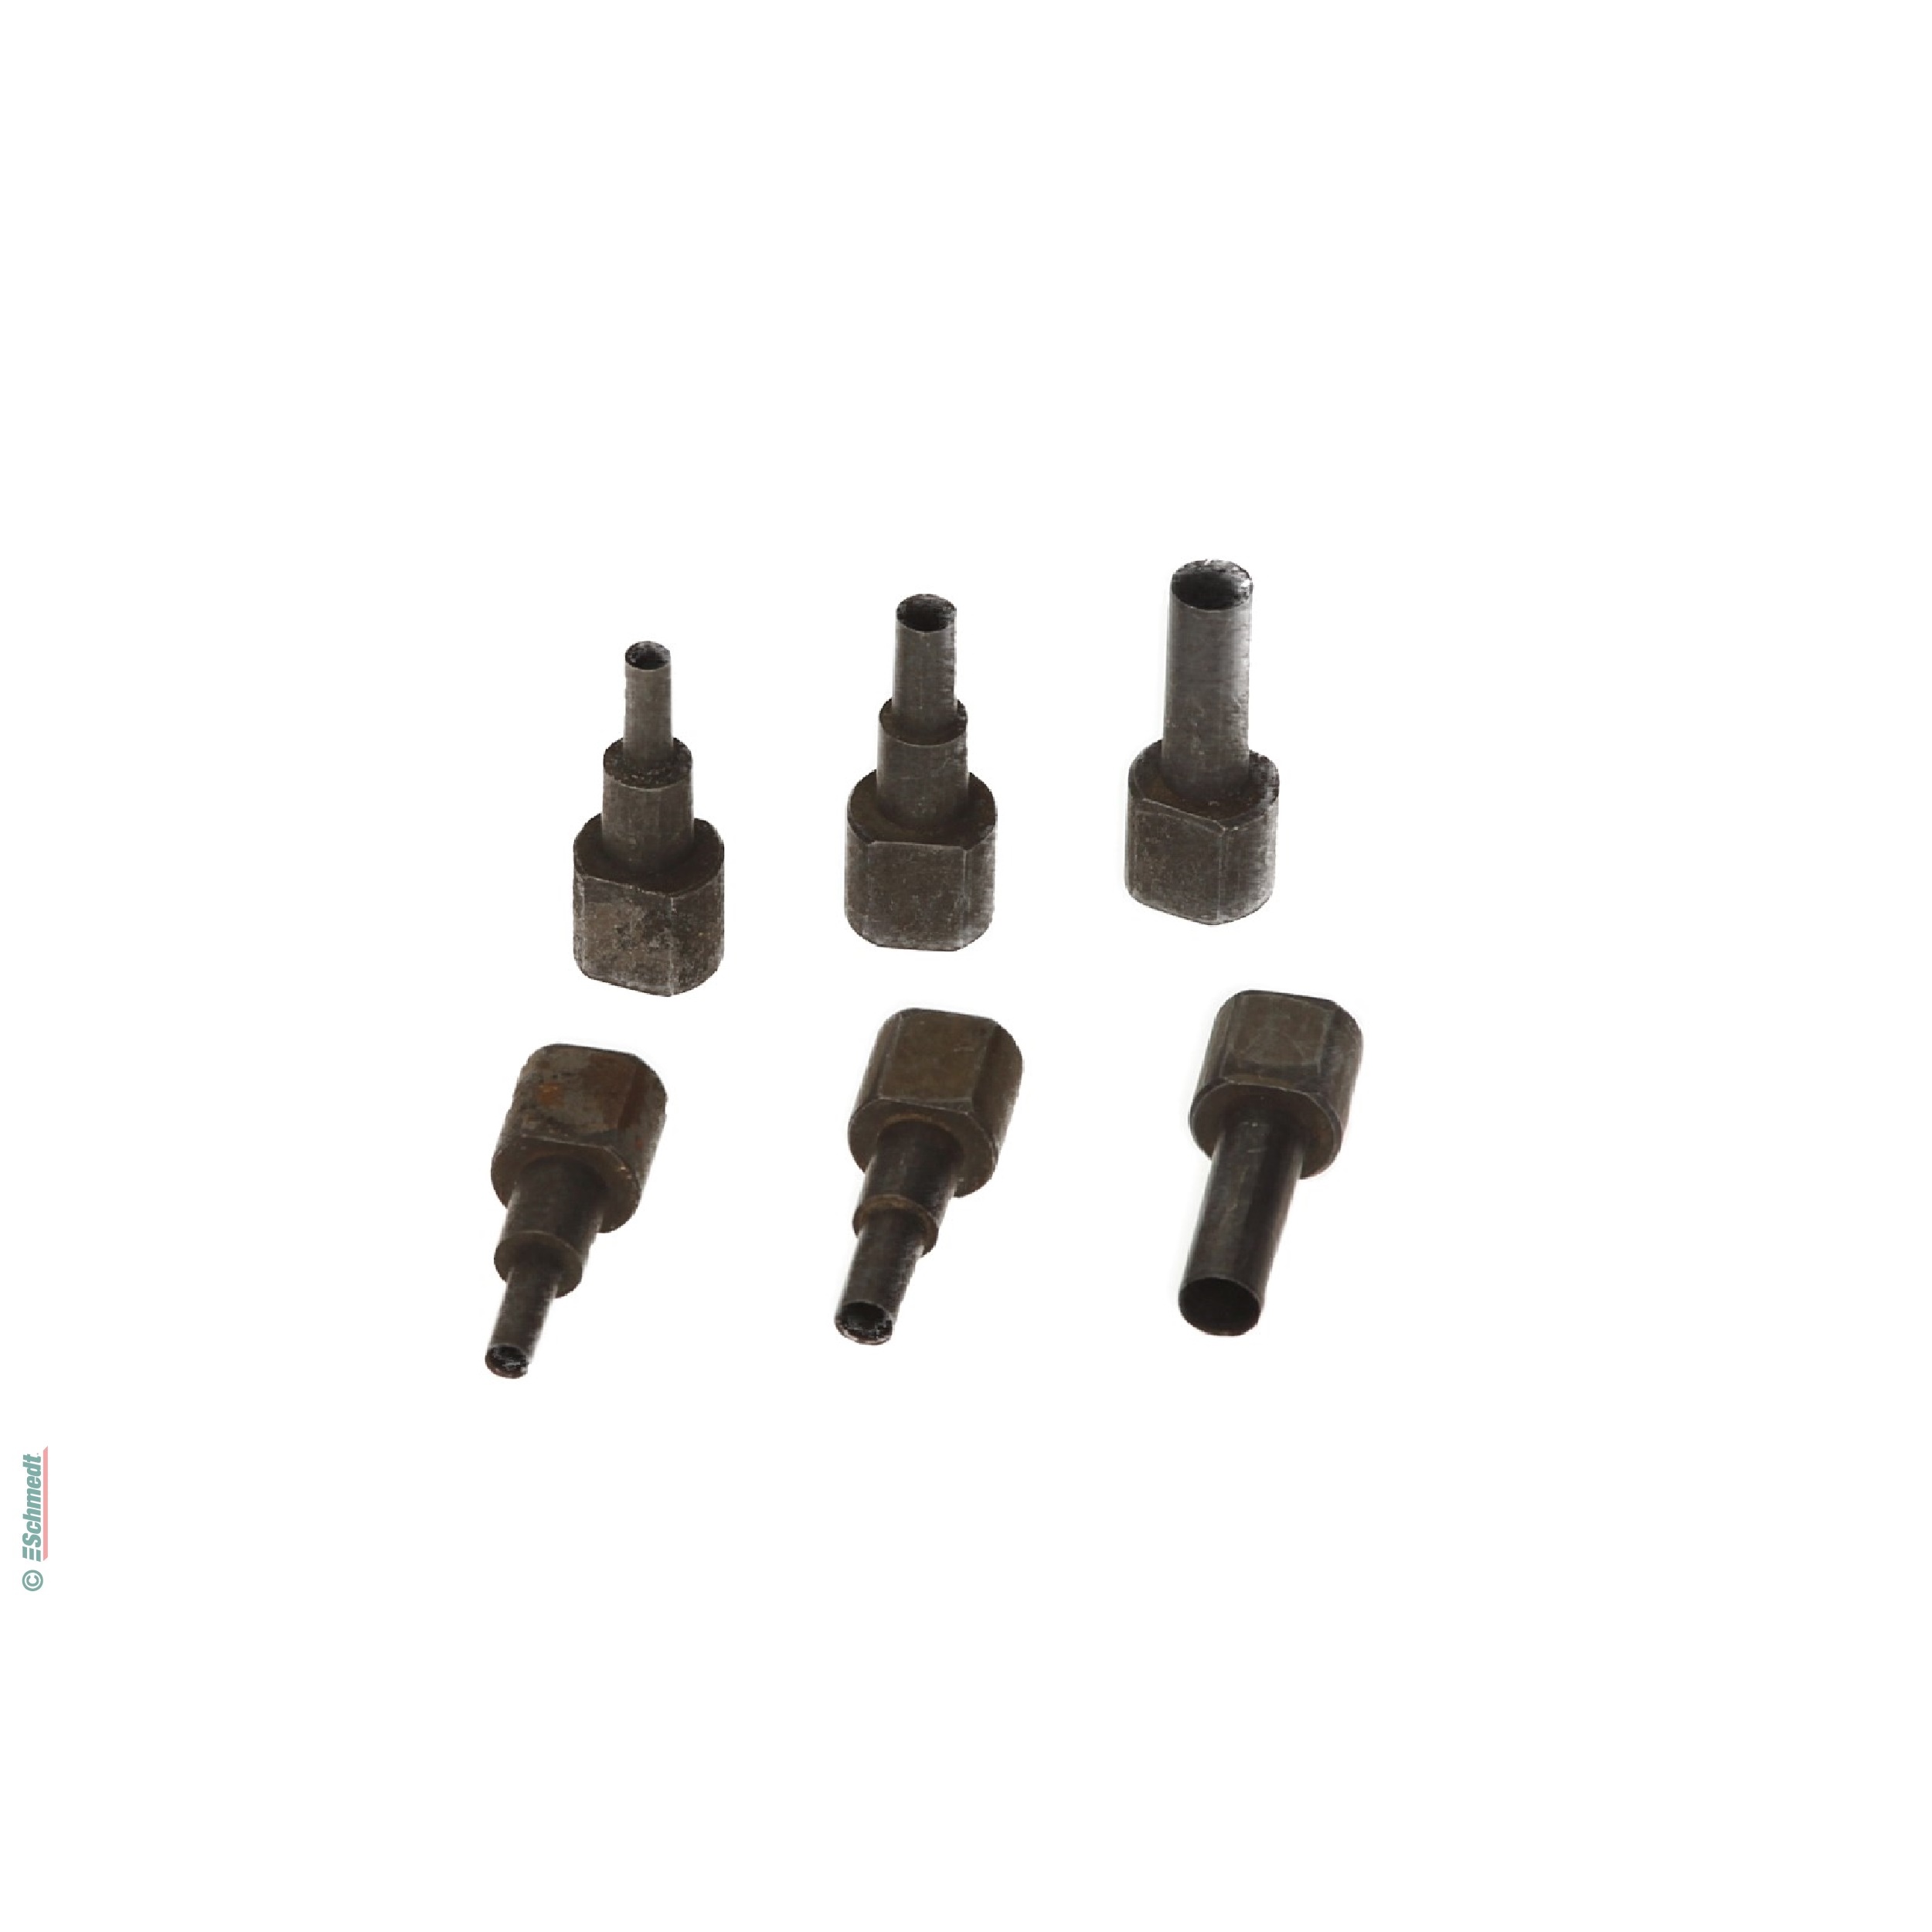 Drill bit - for manual paper drilling device (item 6296-010) - » Total length: 
Ø 3.0 and 4.0 mm: 9.5 mm
Ø 5.5 mm: 17 mm...